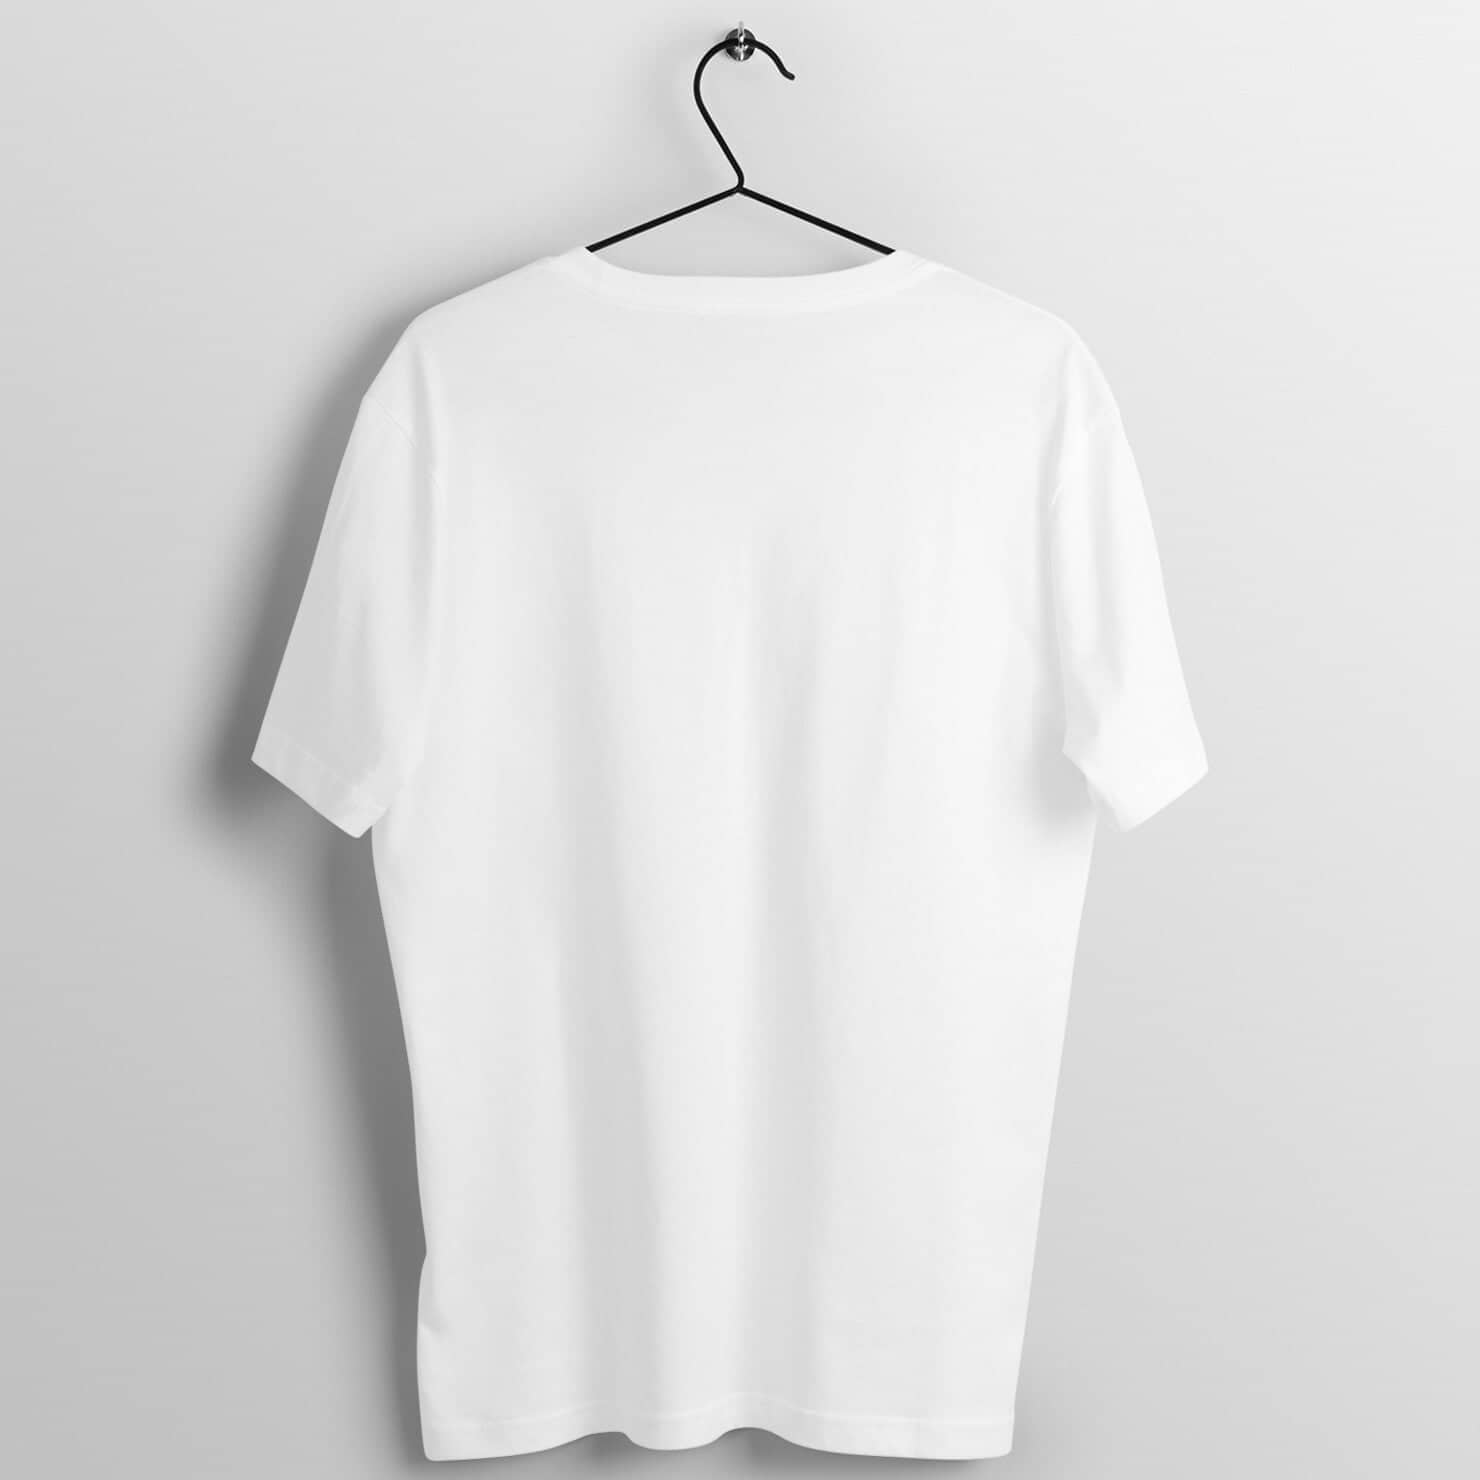 Beast Mode Exclusive white T Shirt for Beast Men and Women Printrove 